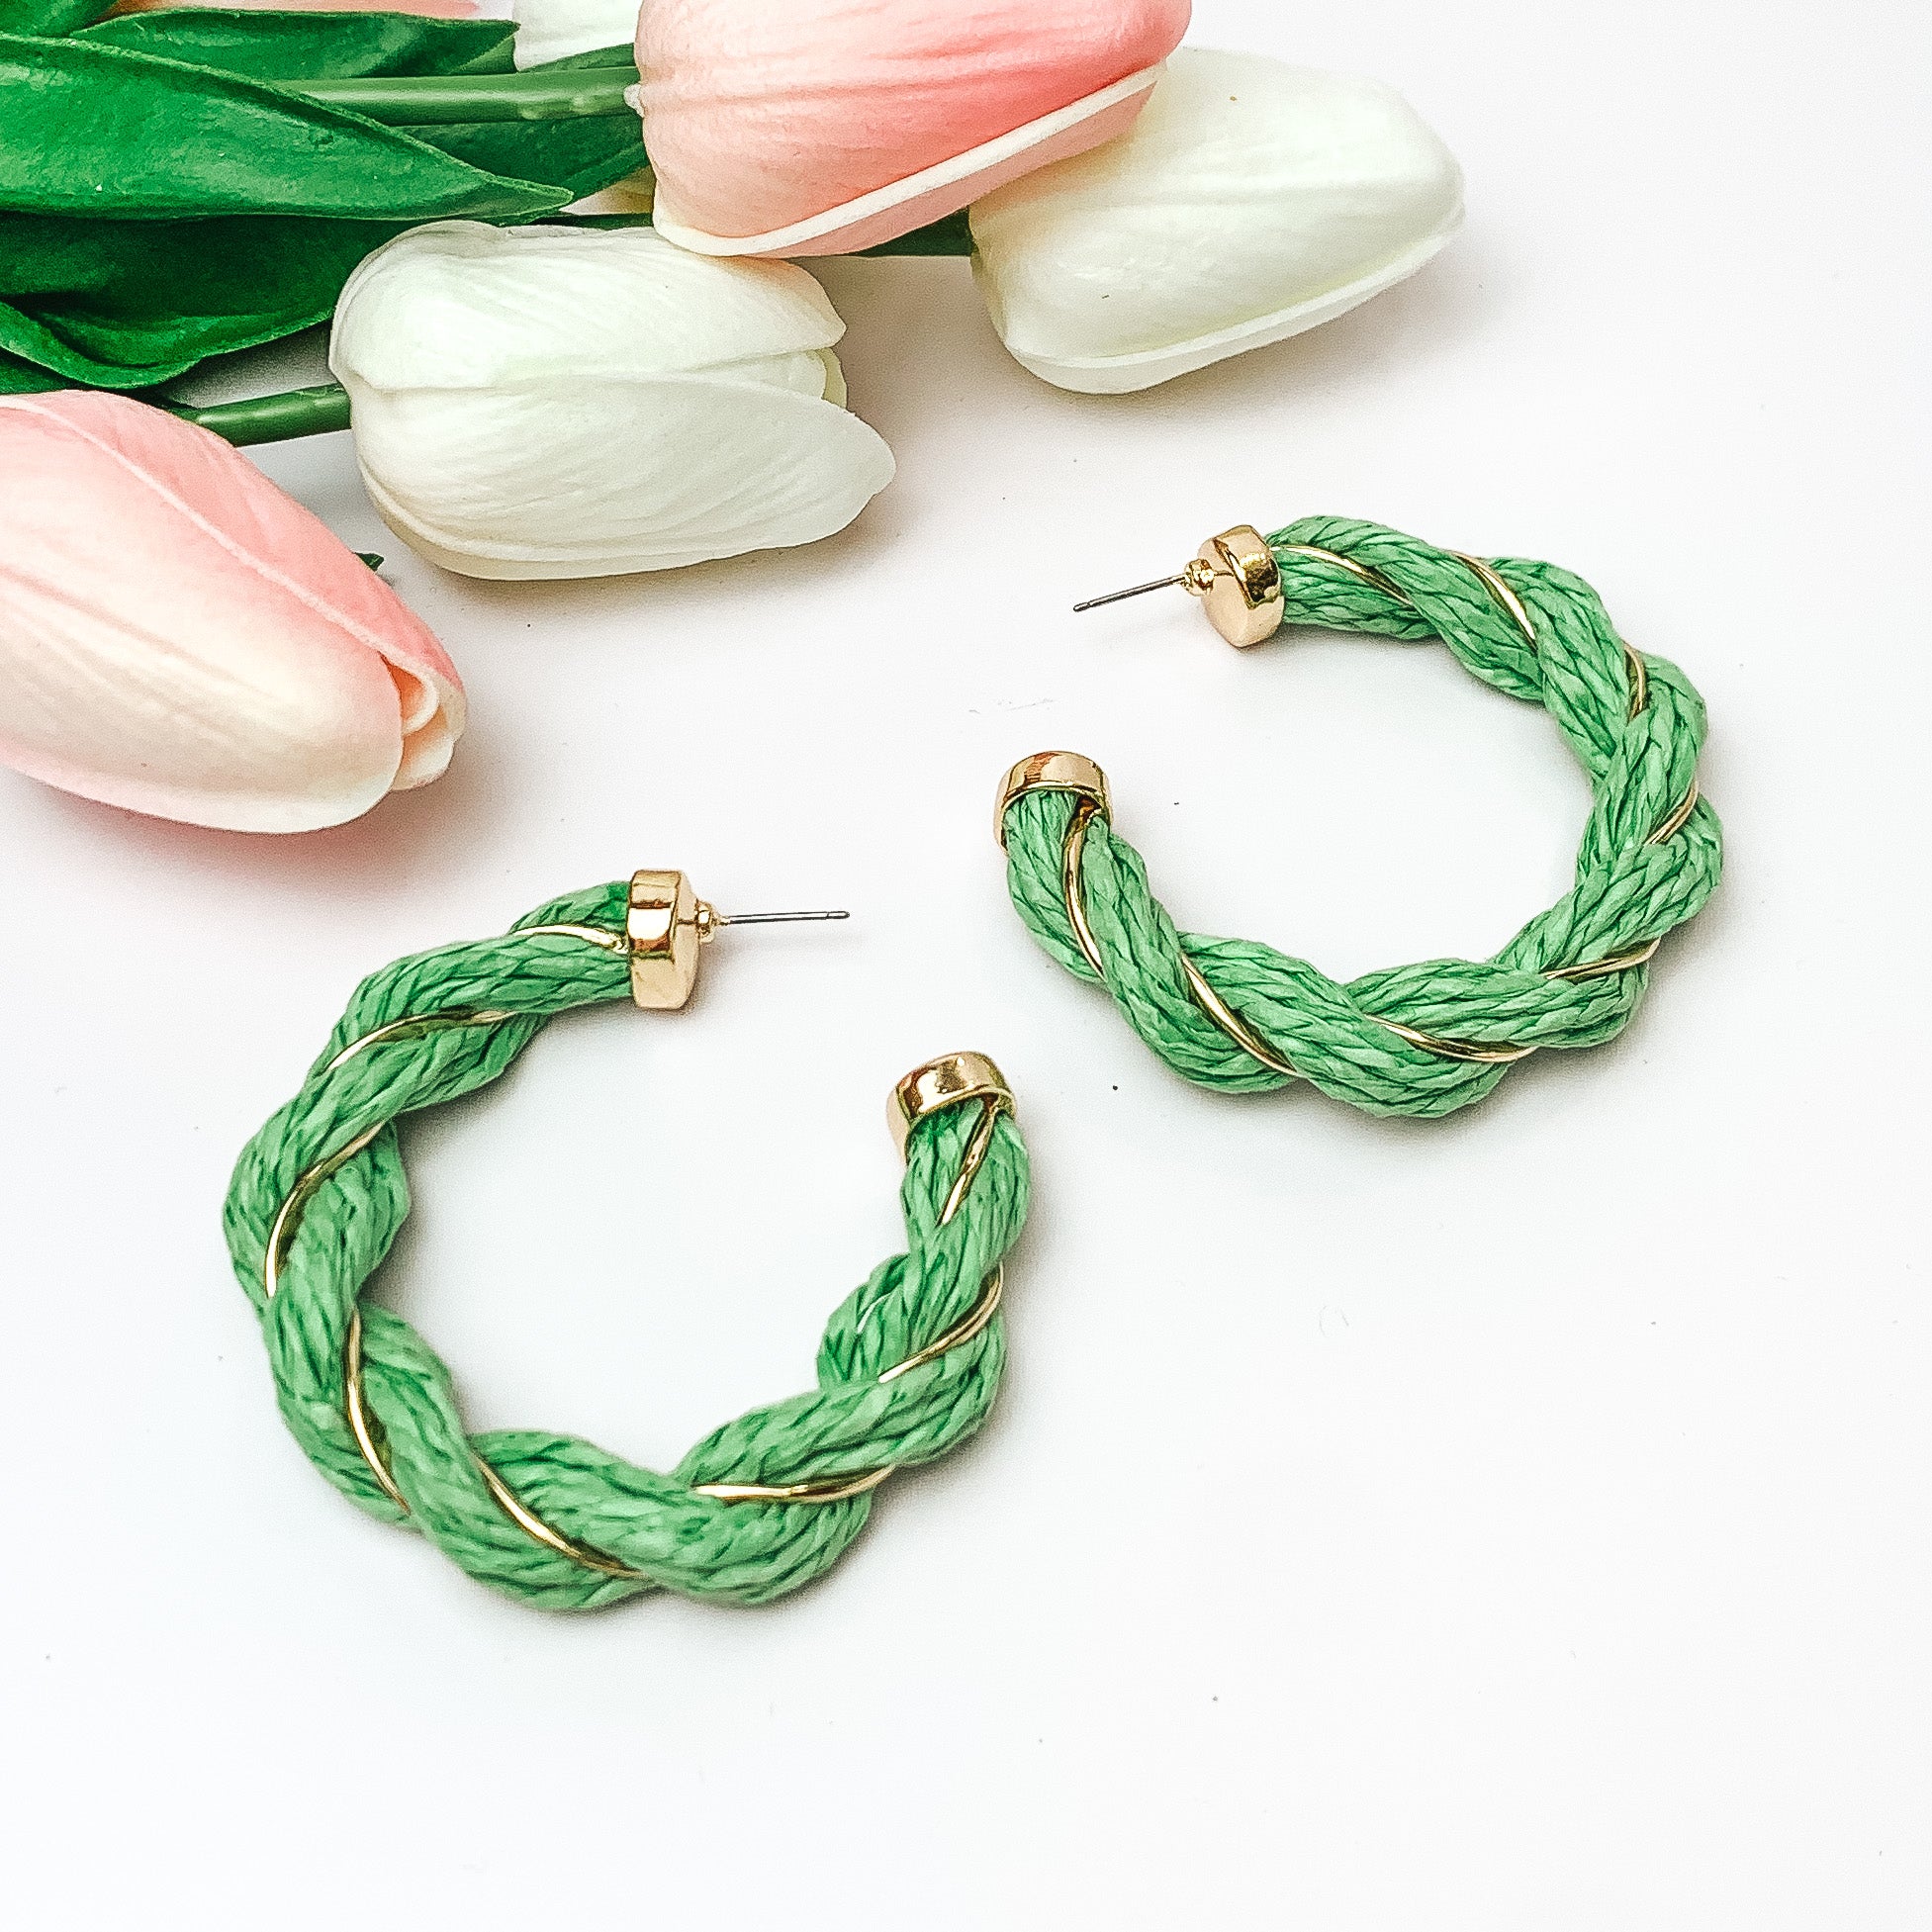 Pictured are light green raffia twisted hoop earrings with gold detailing.  They are pictured with pink and white tulips on a white background.